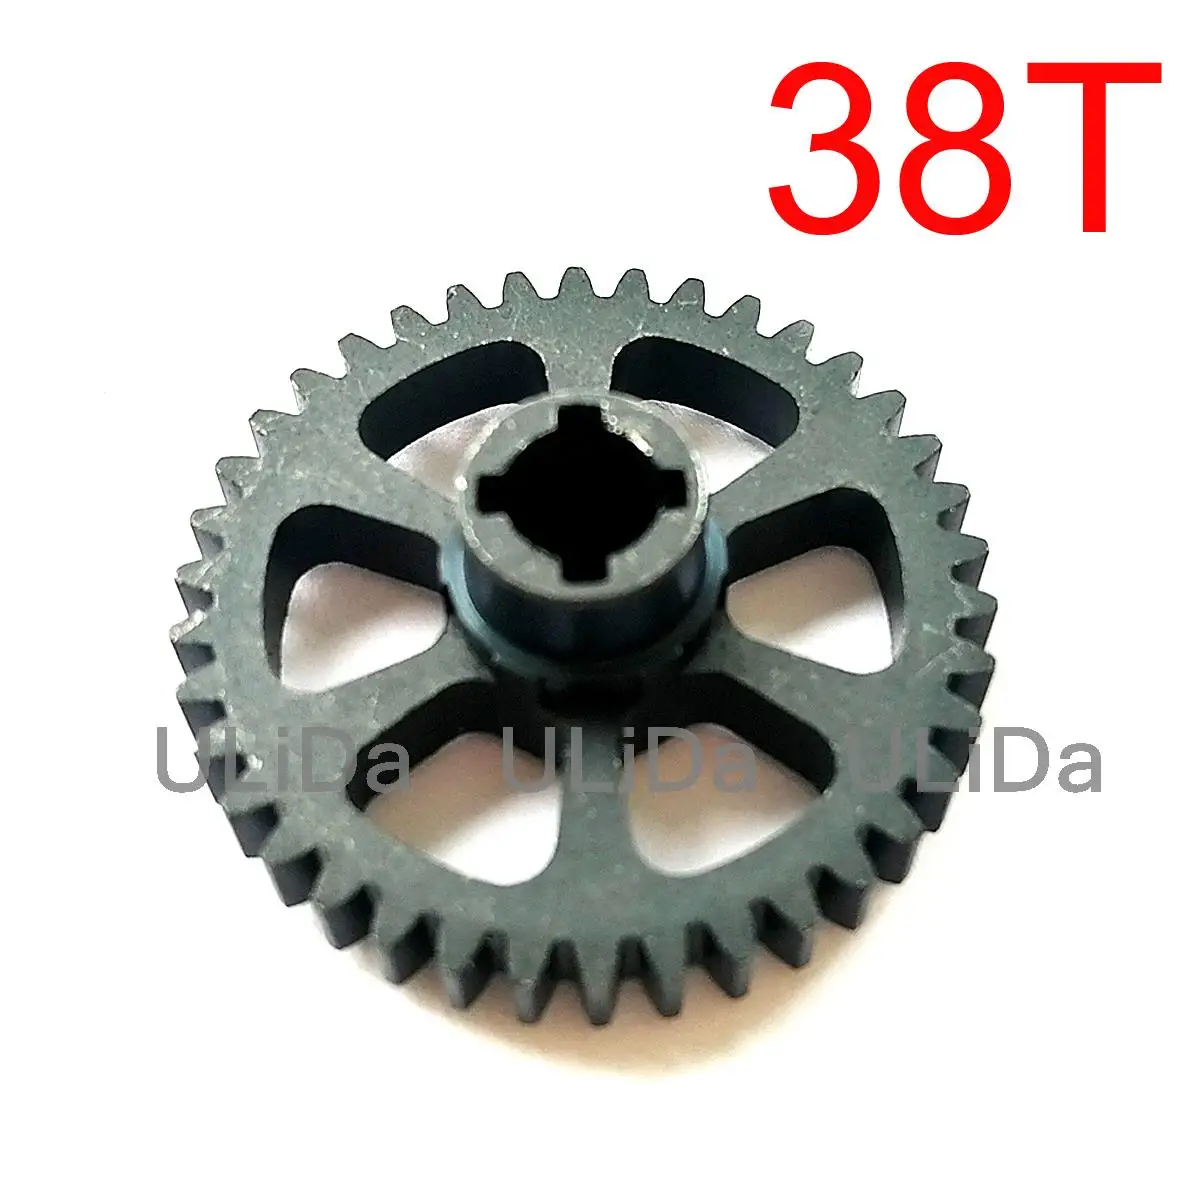 

1:18 WLtoys A959 Upgrade Parts 38T Metal Reduction Spur Diff Main Gear Fit A949 A959 A969 A979 K929 A949-24 RC Car